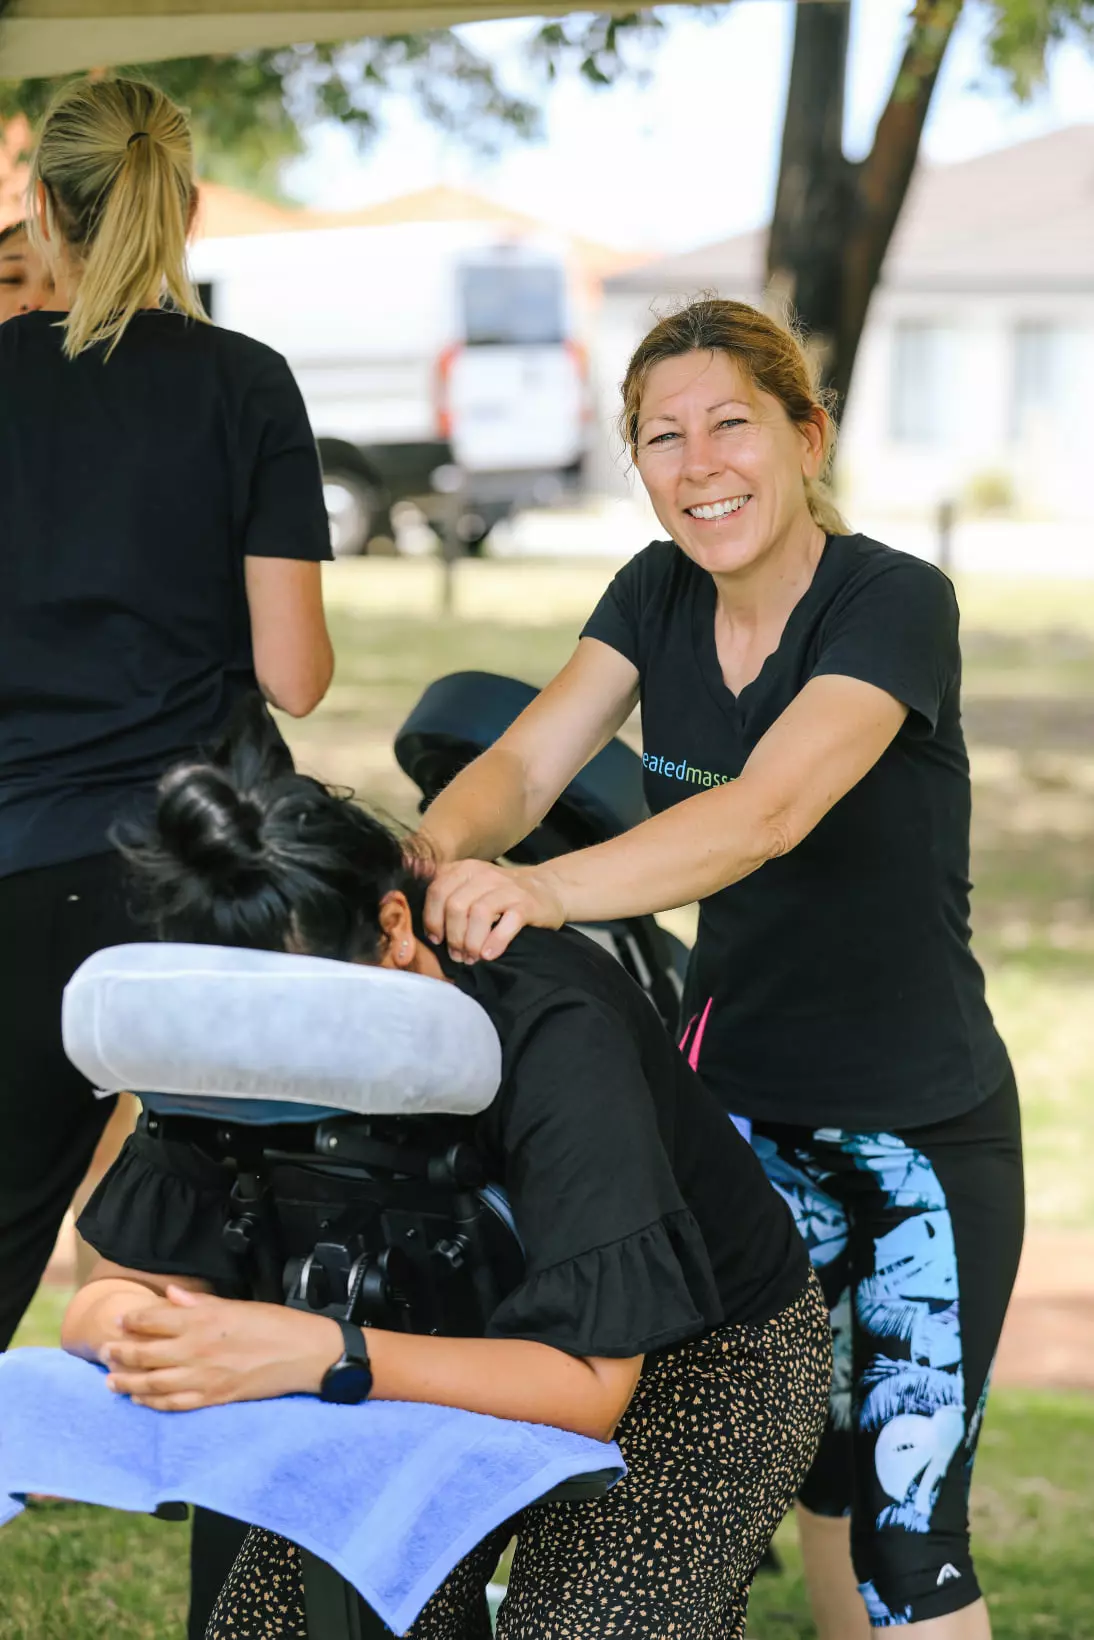 A female massage therapist giving a massage outdoors at an event and smiling at the camera